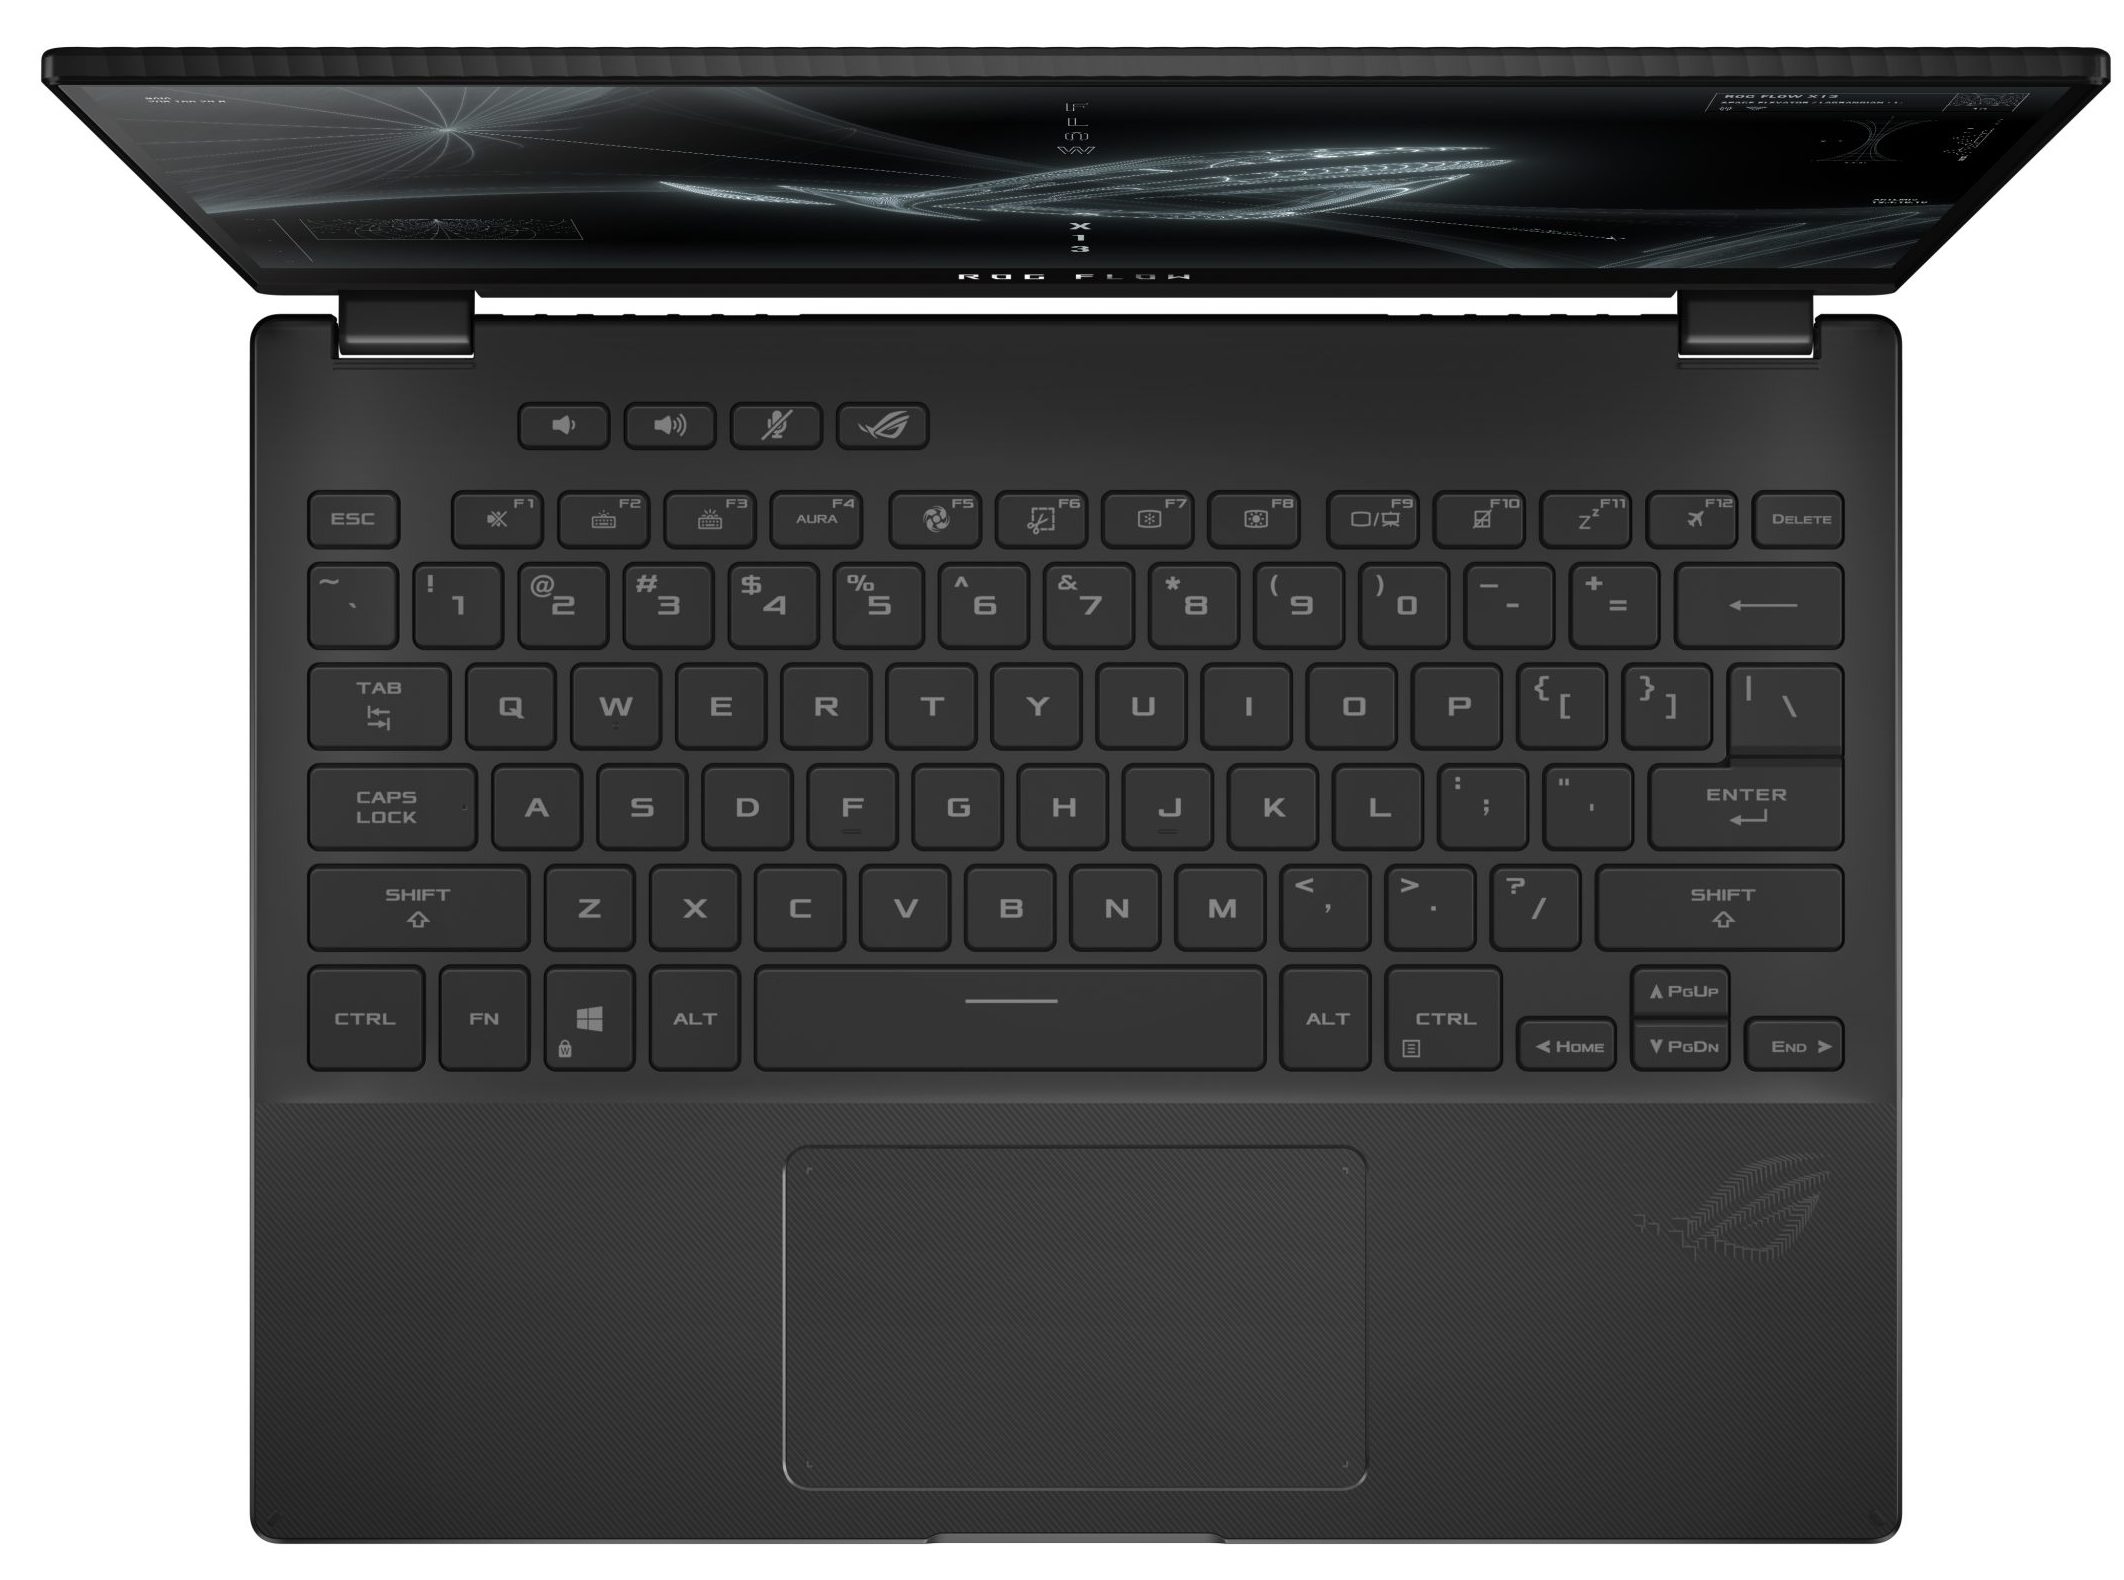 ASUS ROG Flow X13 (GV301 / PV301) - Specs, Tests, and Prices